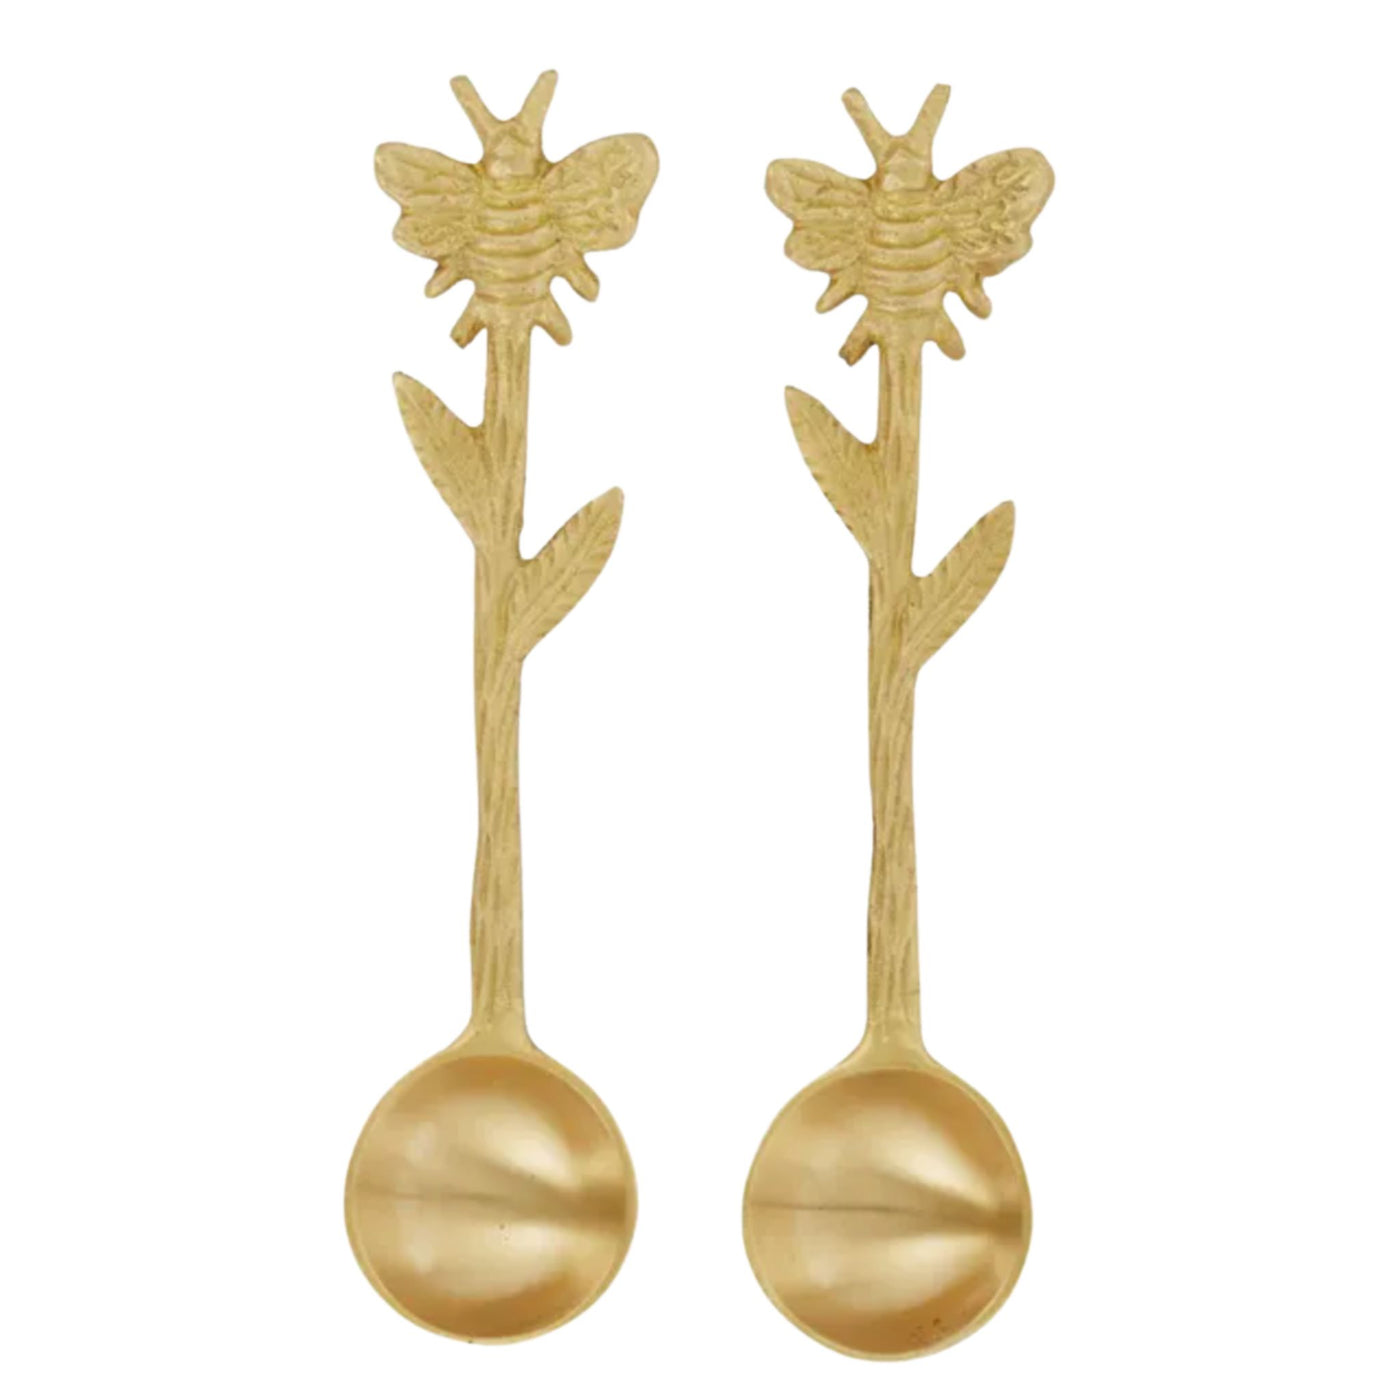 Hive Brass Spoons